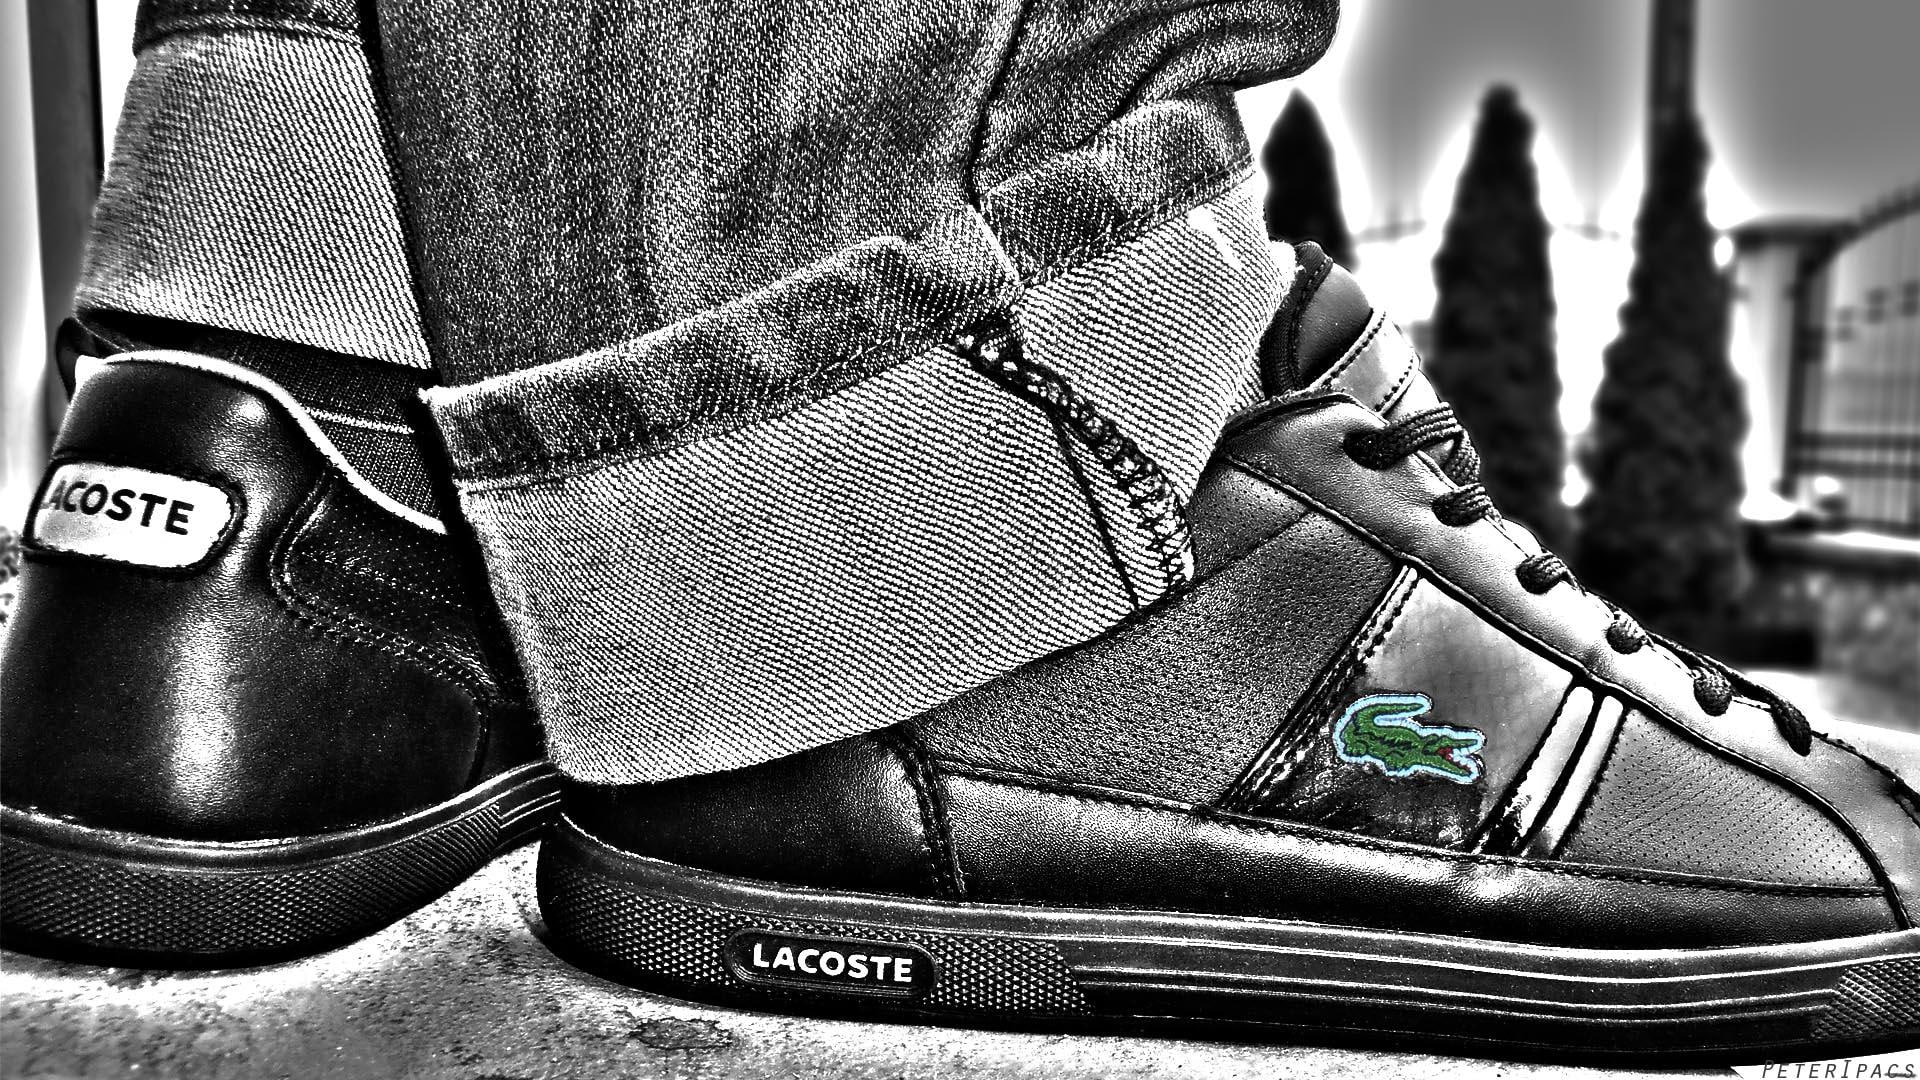 Wallpaper Lacoste, Black And Grey Lacoste Sneaker, Lacoste Wallpaper, Other